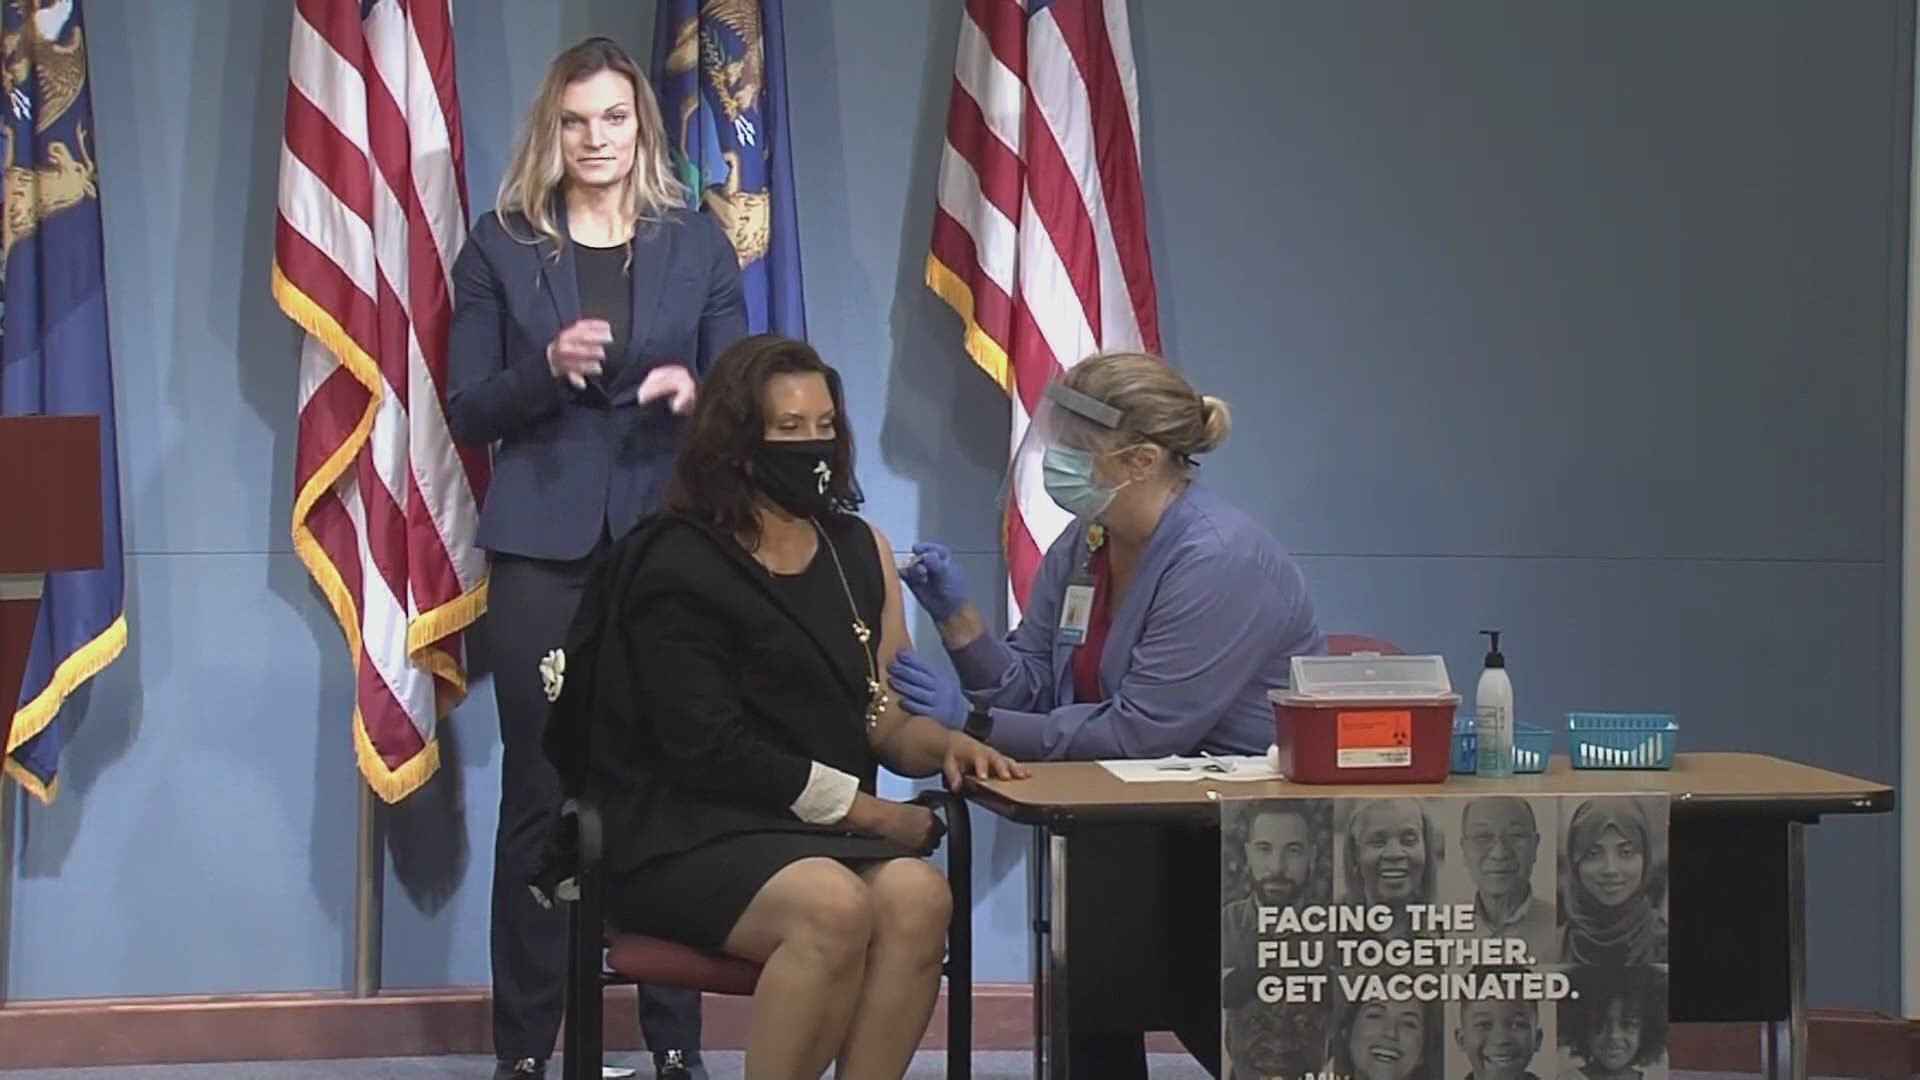 Whitmer received a flu shot during a news conference to “show how easy it is.”